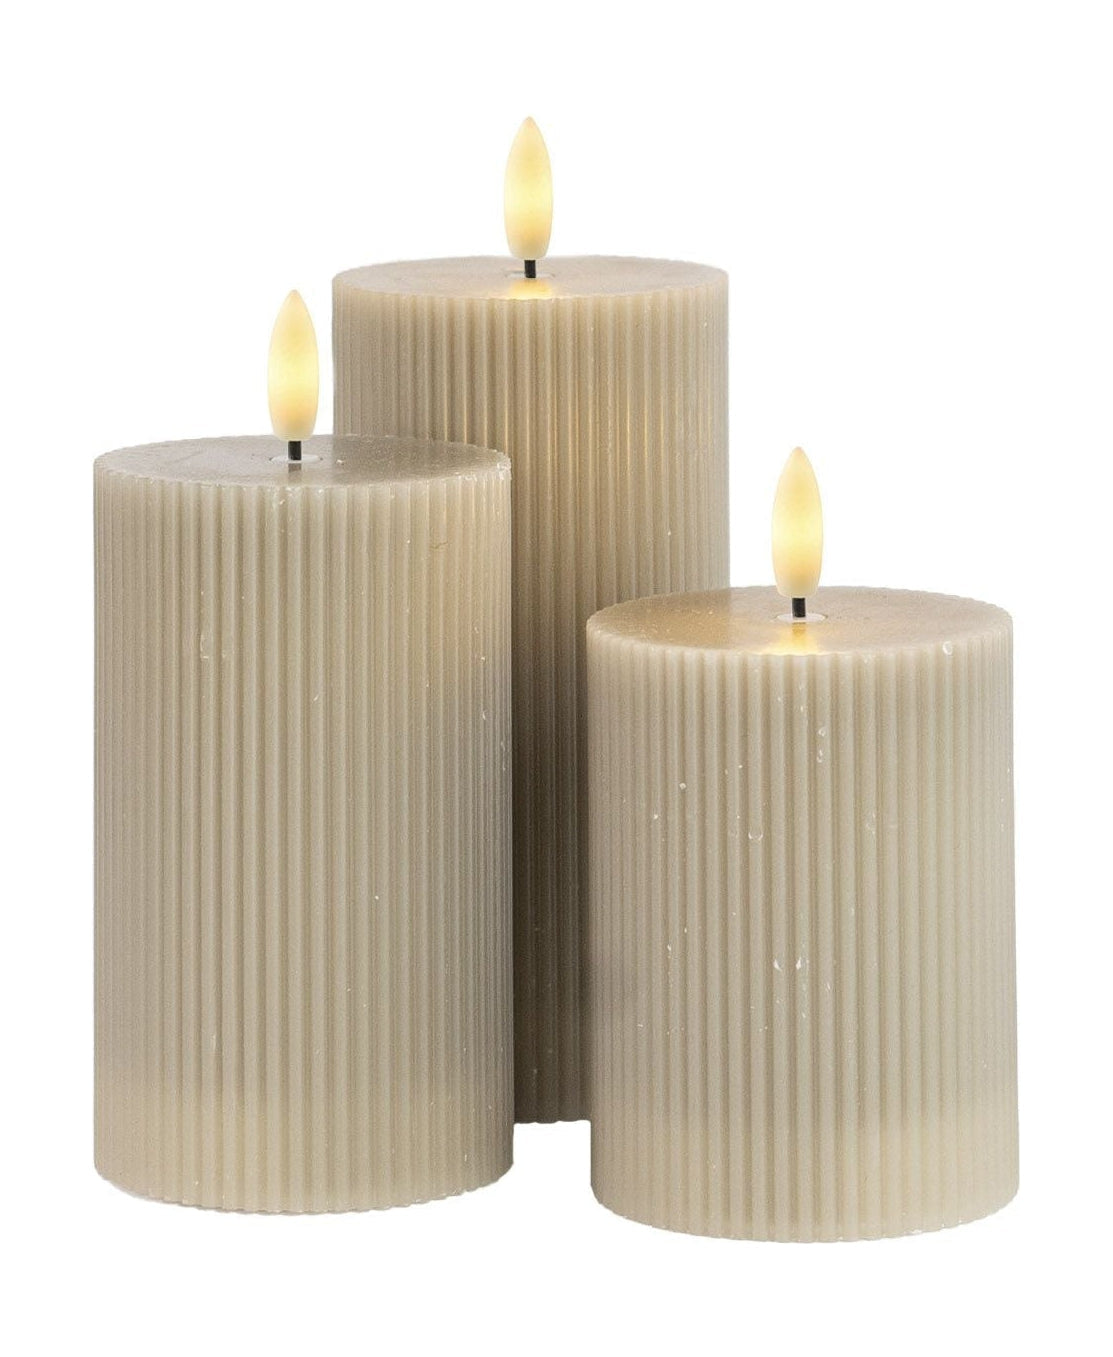 Sirius Smilla Rechargeable Led Candle 3 Pcs. ø7,5x H10/12,5/15cm, Warm Grey